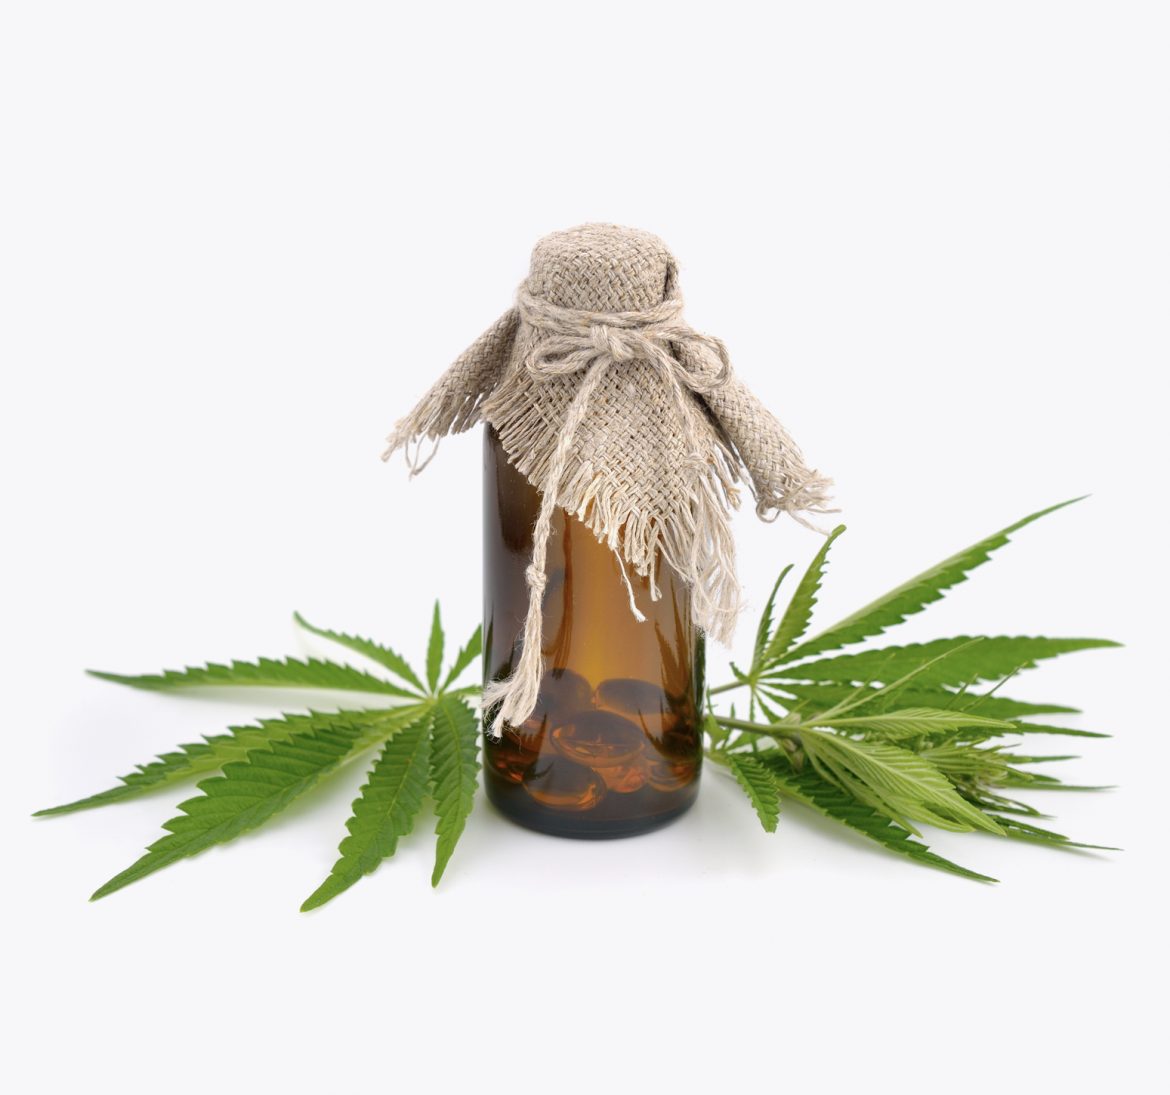 Rumored Buzz on Cbd Oil Florida: Is It Legal